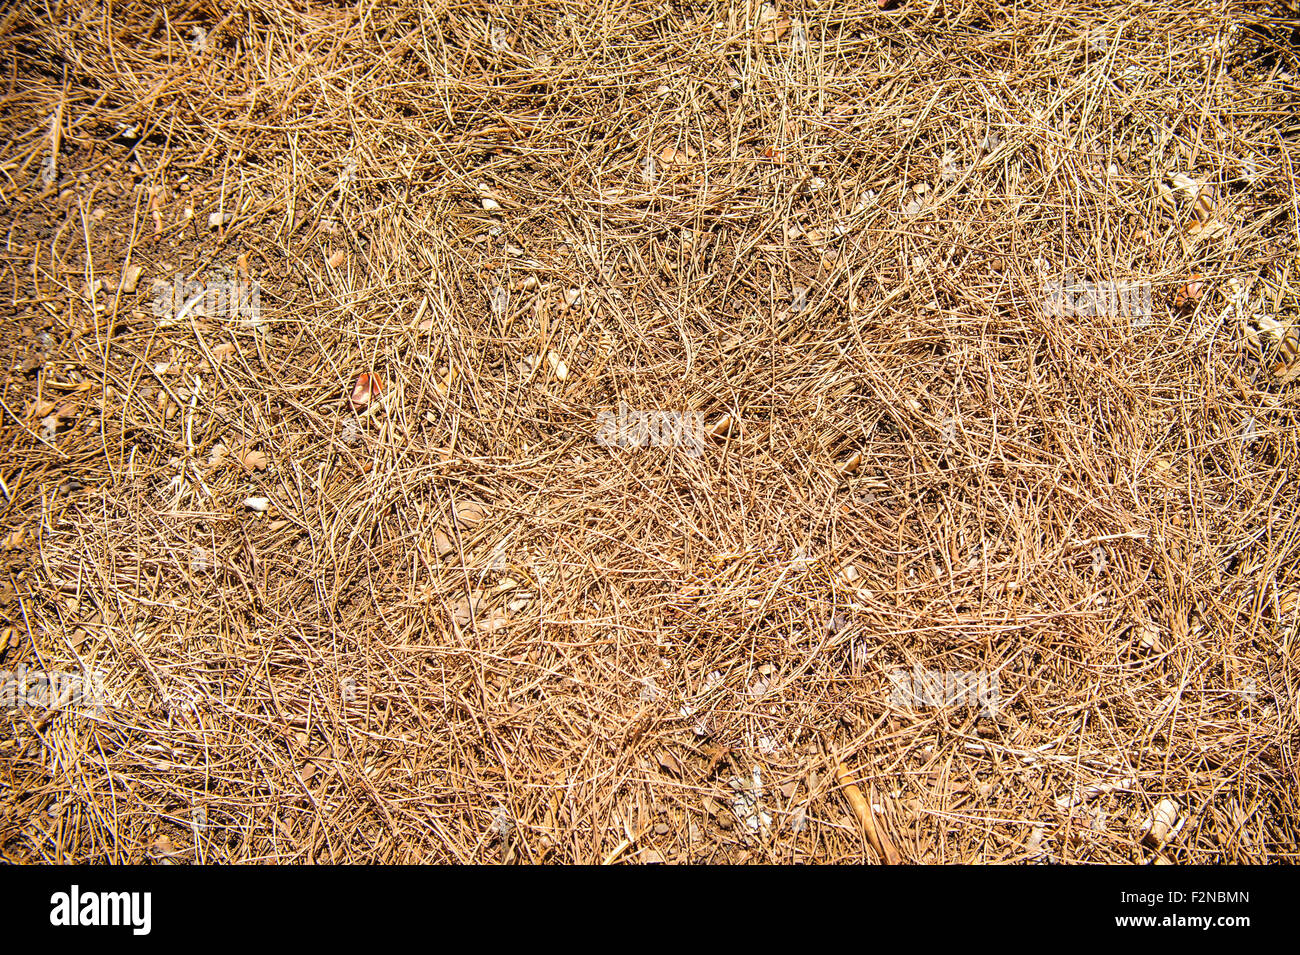 Natural undergrowth background texture with brown pine needles Stock Photo